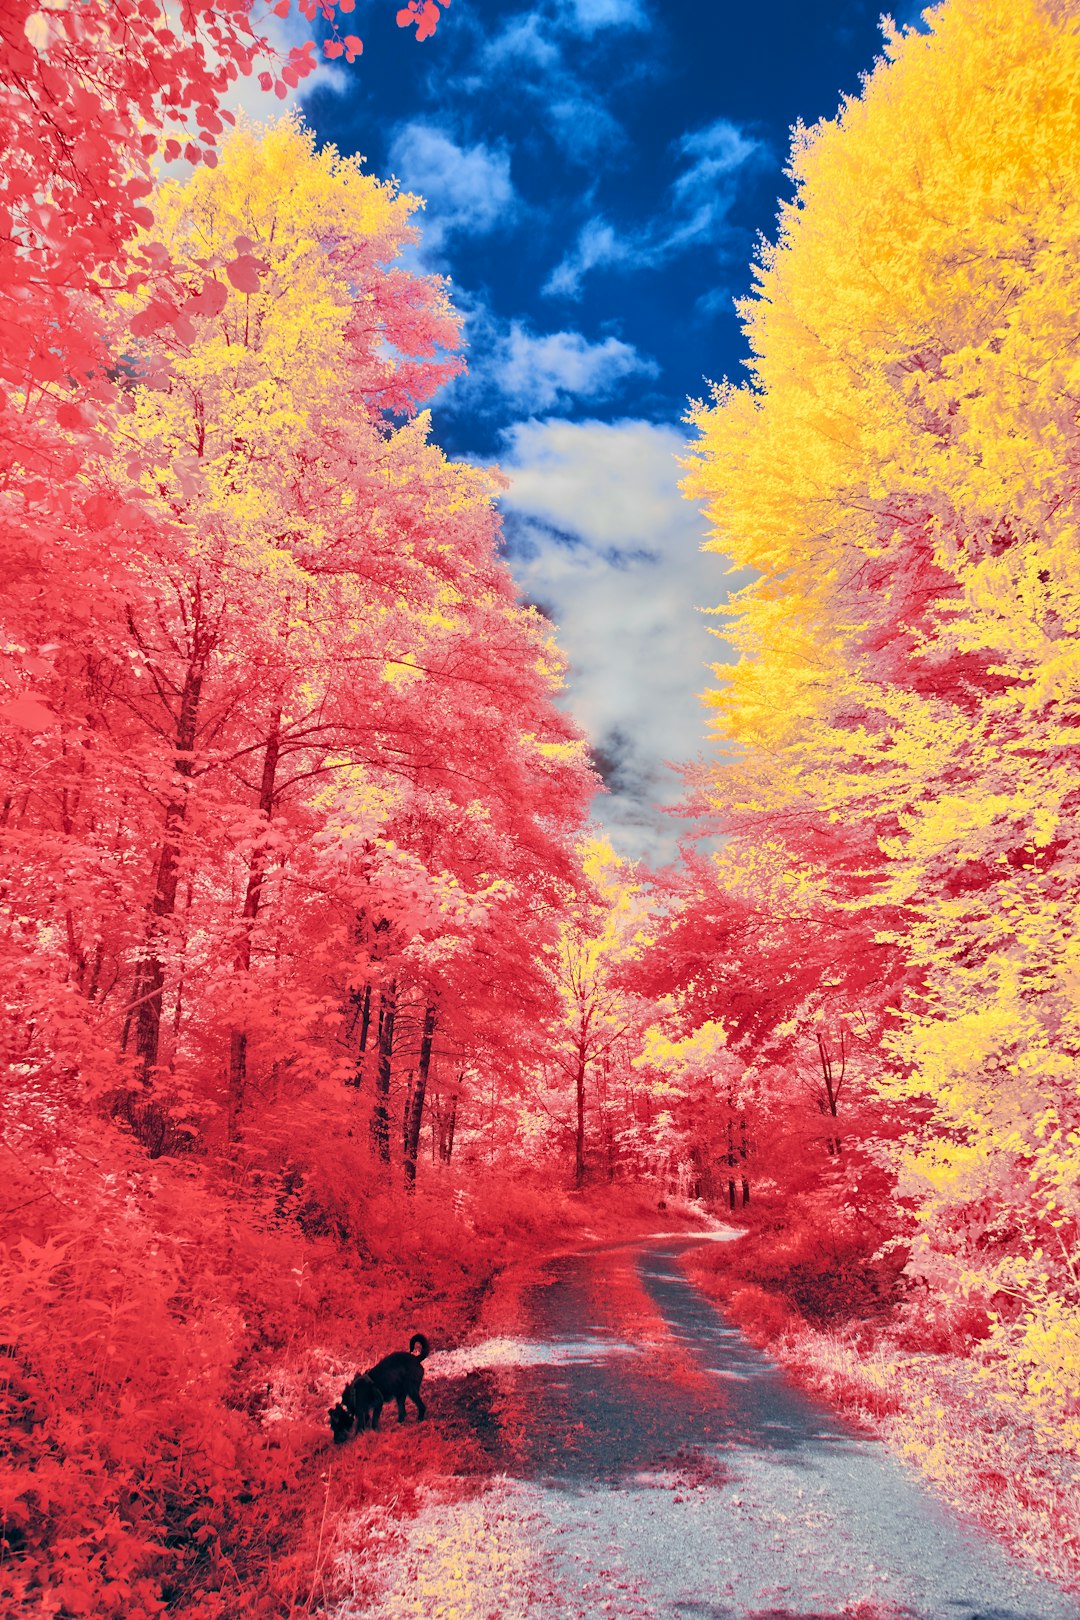 yellow and red trees under blue sky